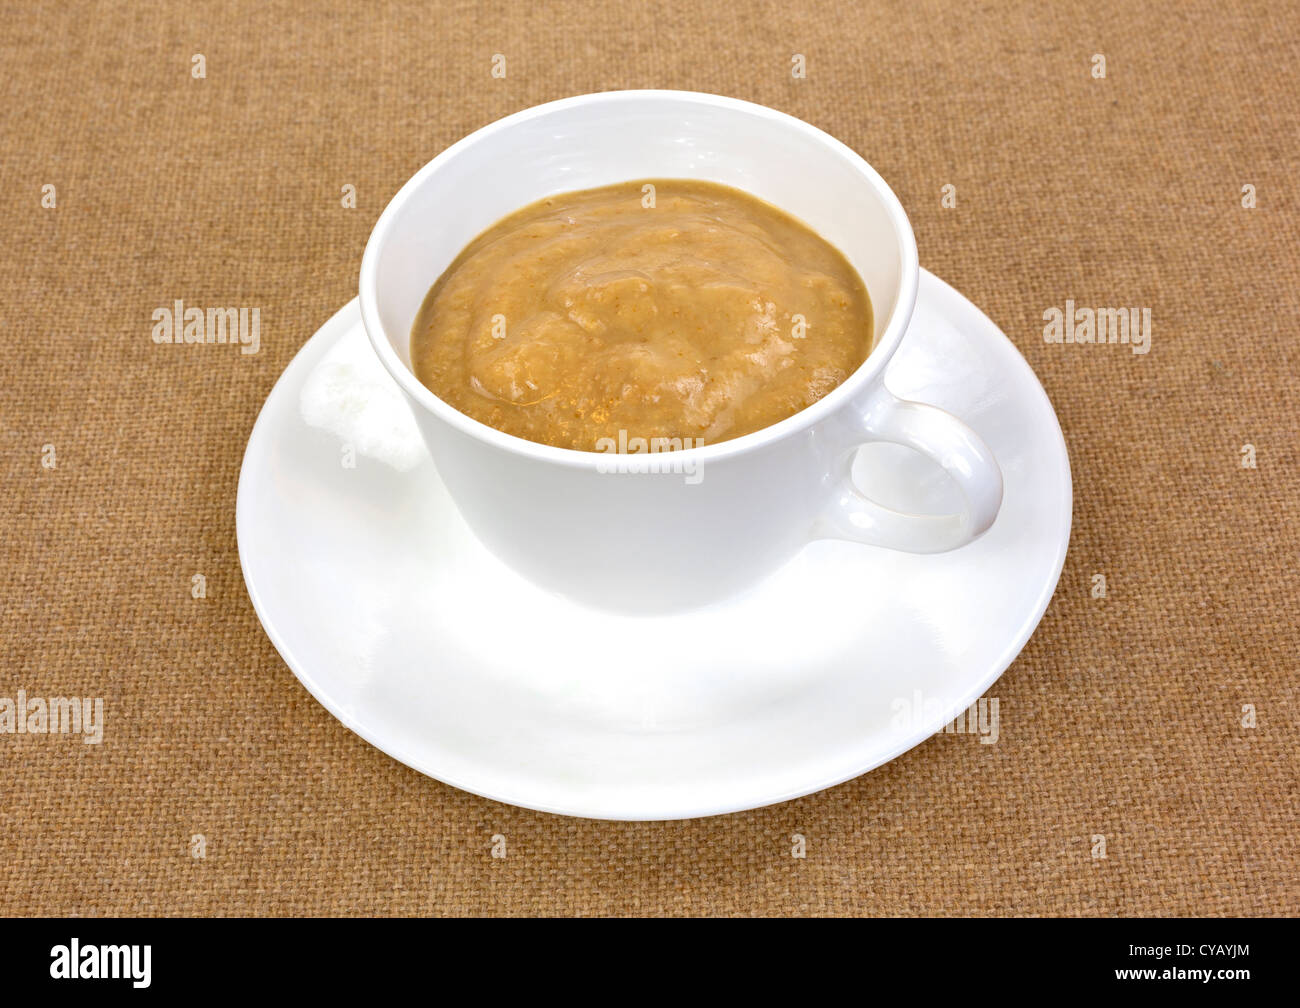 A thick and creamy high potency antioxidant drink in a white cup and saucer. Stock Photo